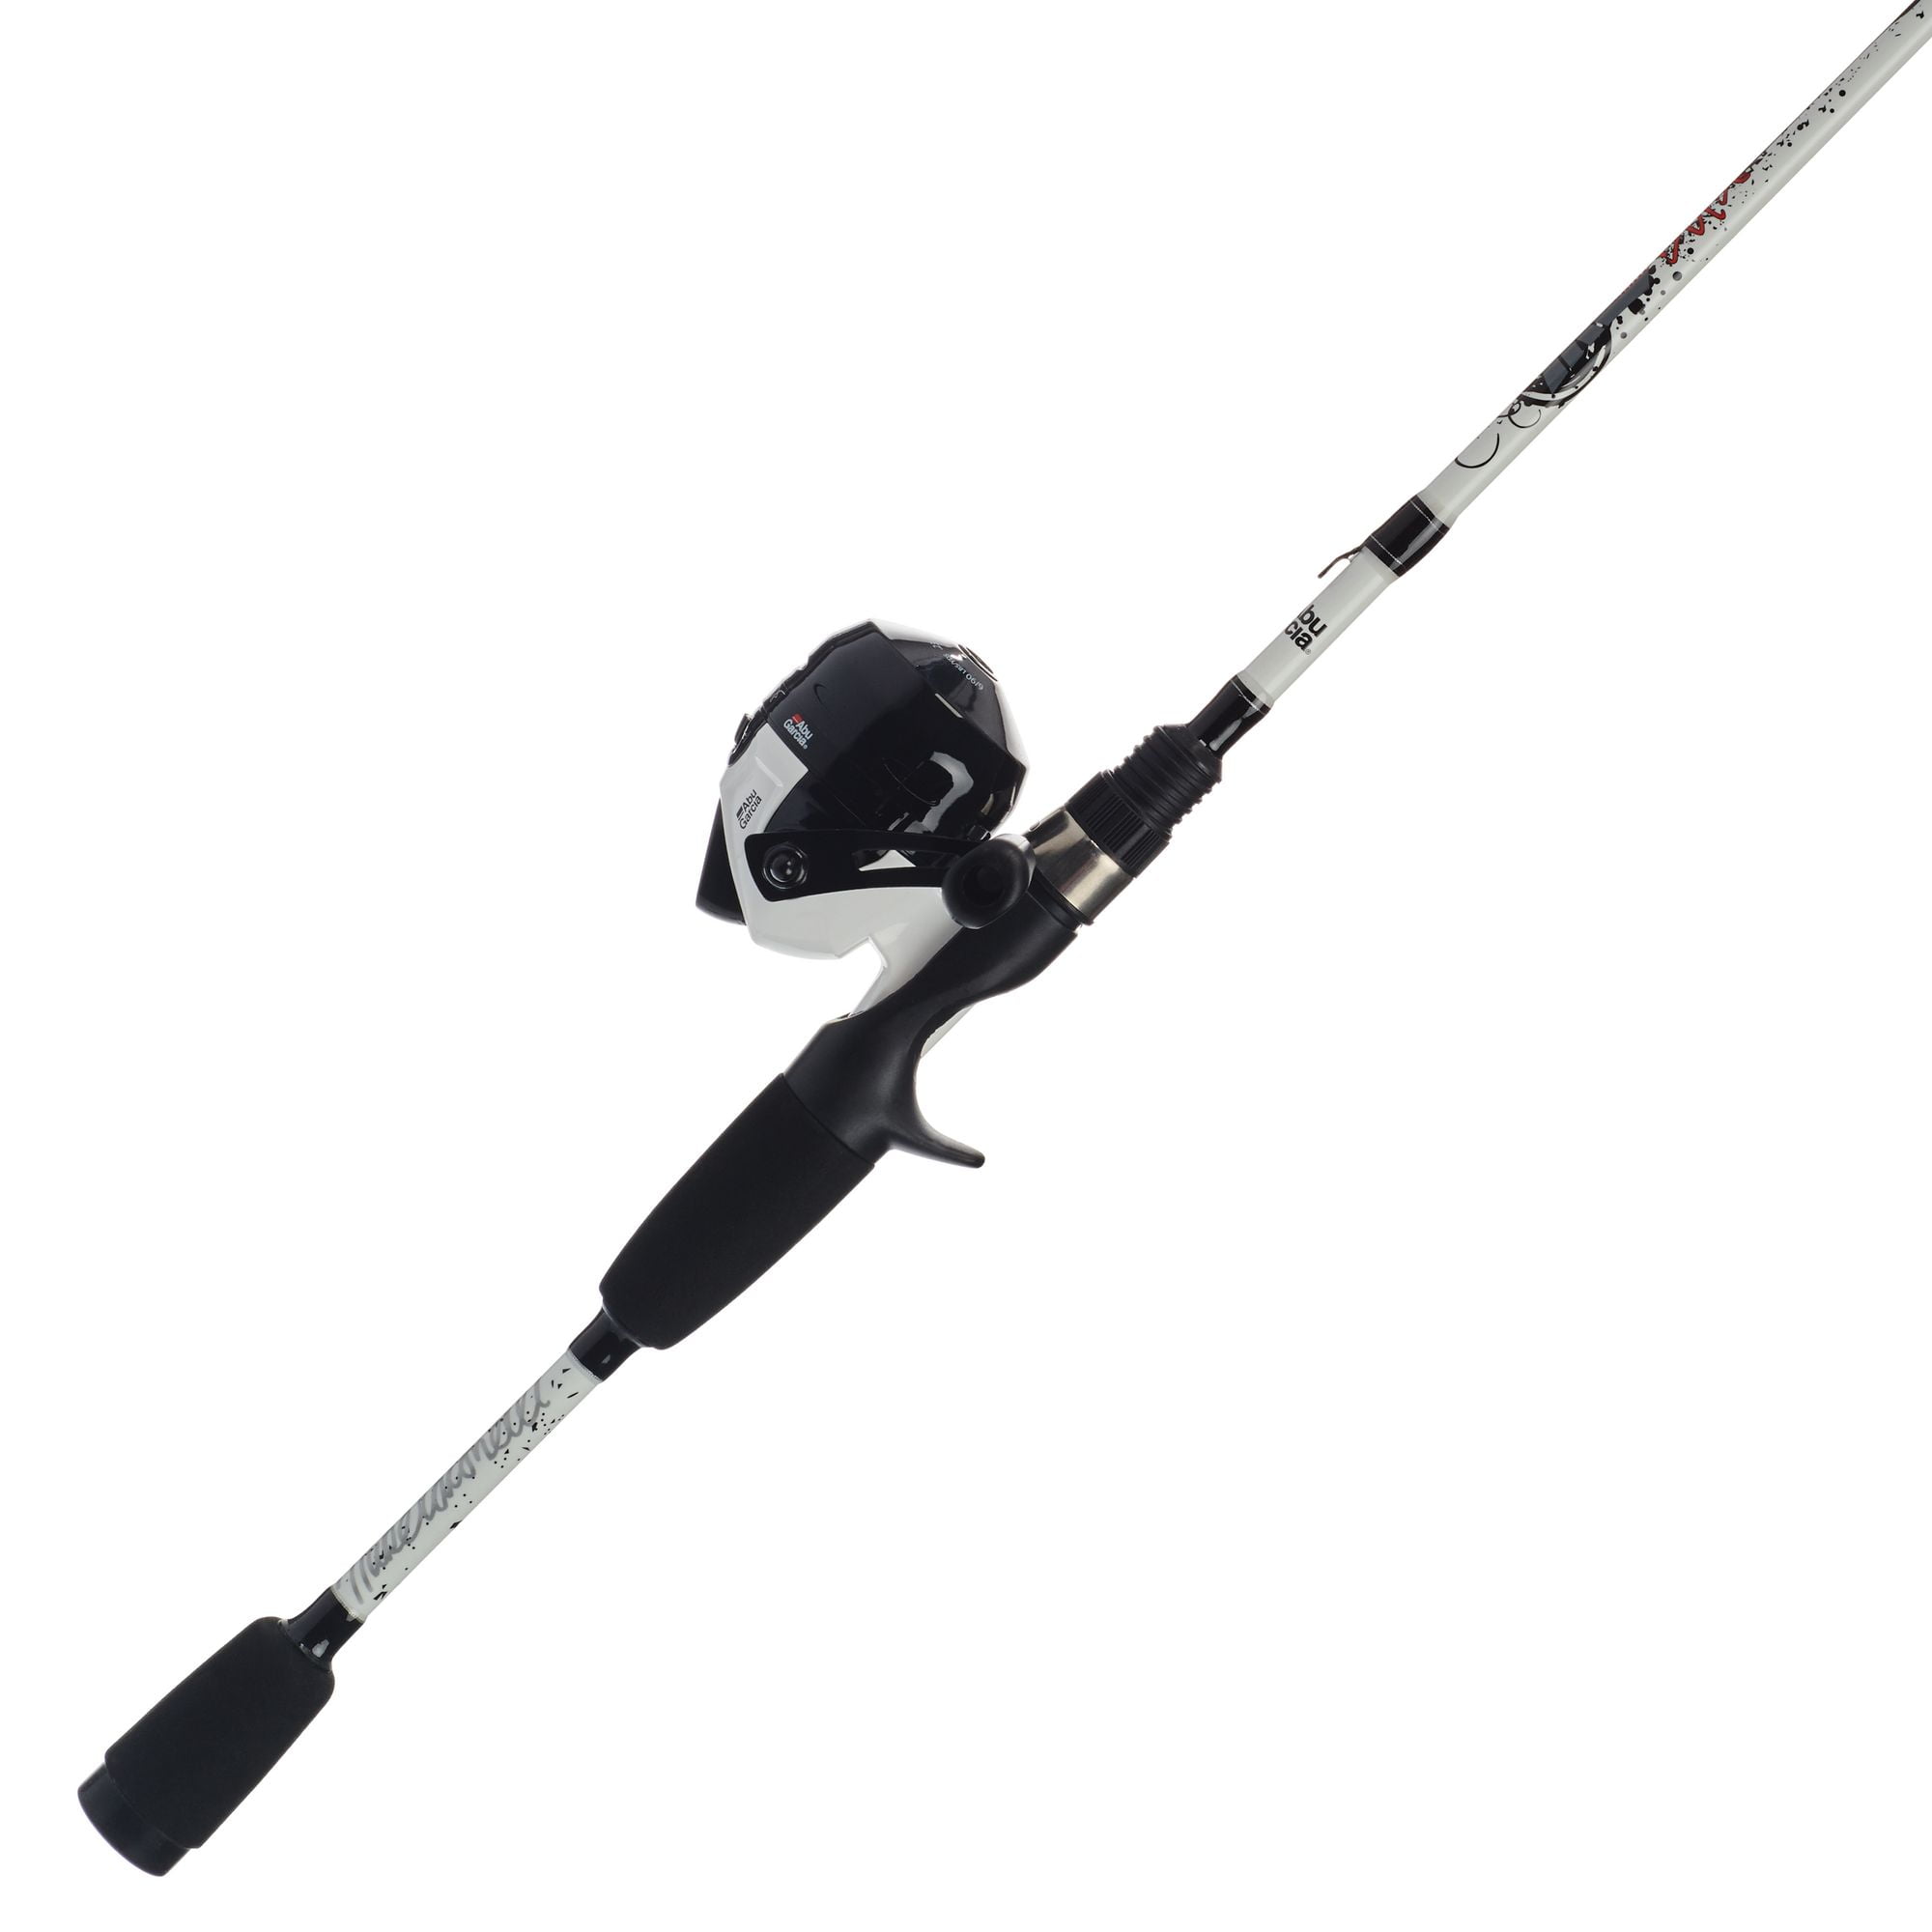  Abu Garcia 6' Gen IKE EZ Cast Youth Fishing Rod and Reel  Baitcast Combo, 1-Piece Rod, Size LP Reel, Right Hand Position, Fishing Rod  and Reel for Kids,Red/White : Everything Else